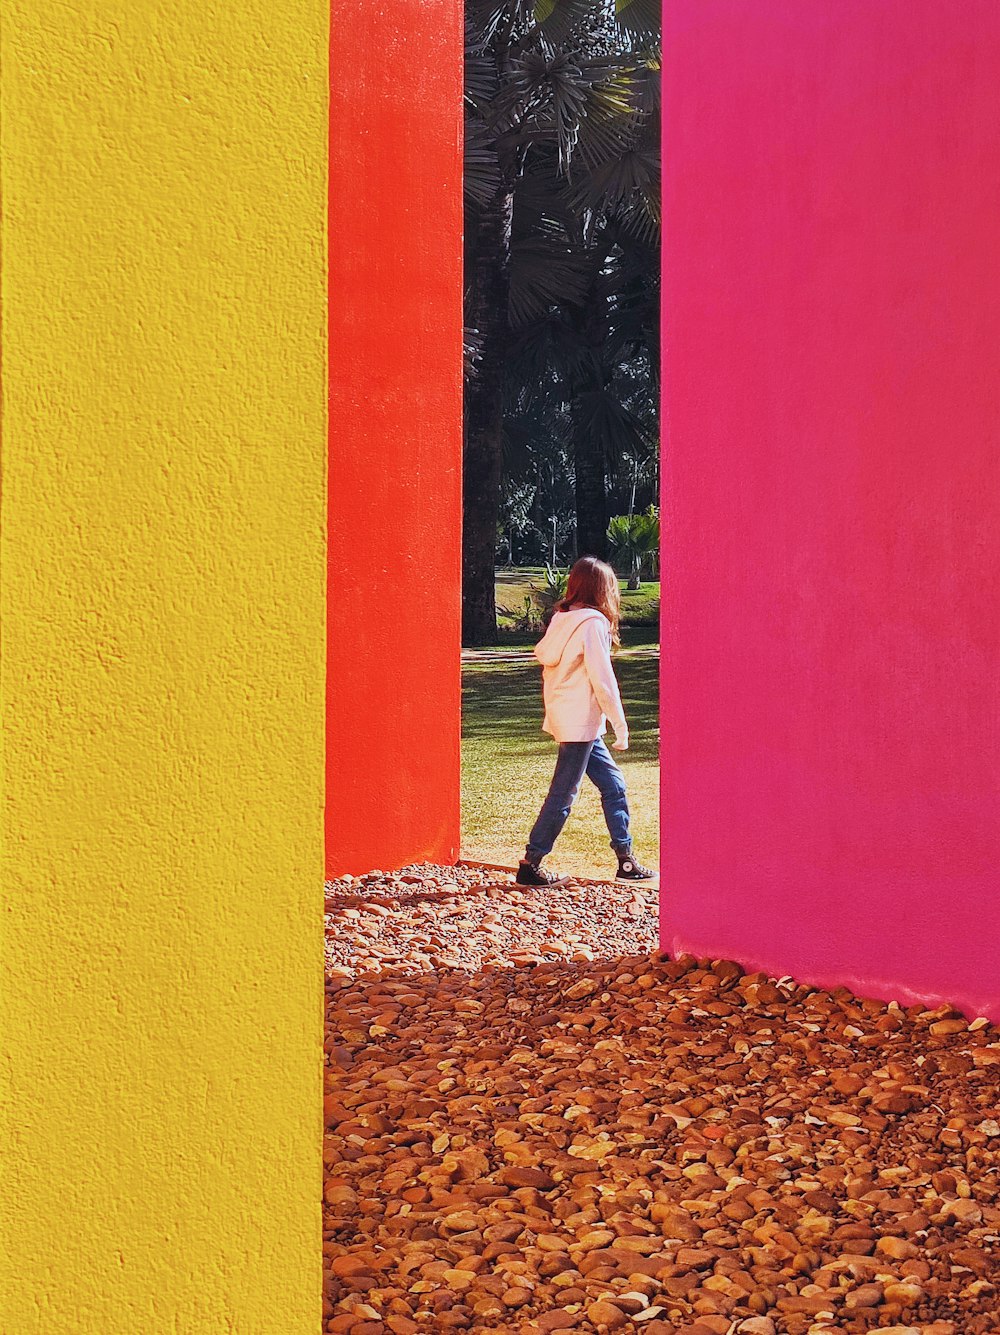 a person walking through a room with multiple colored walls